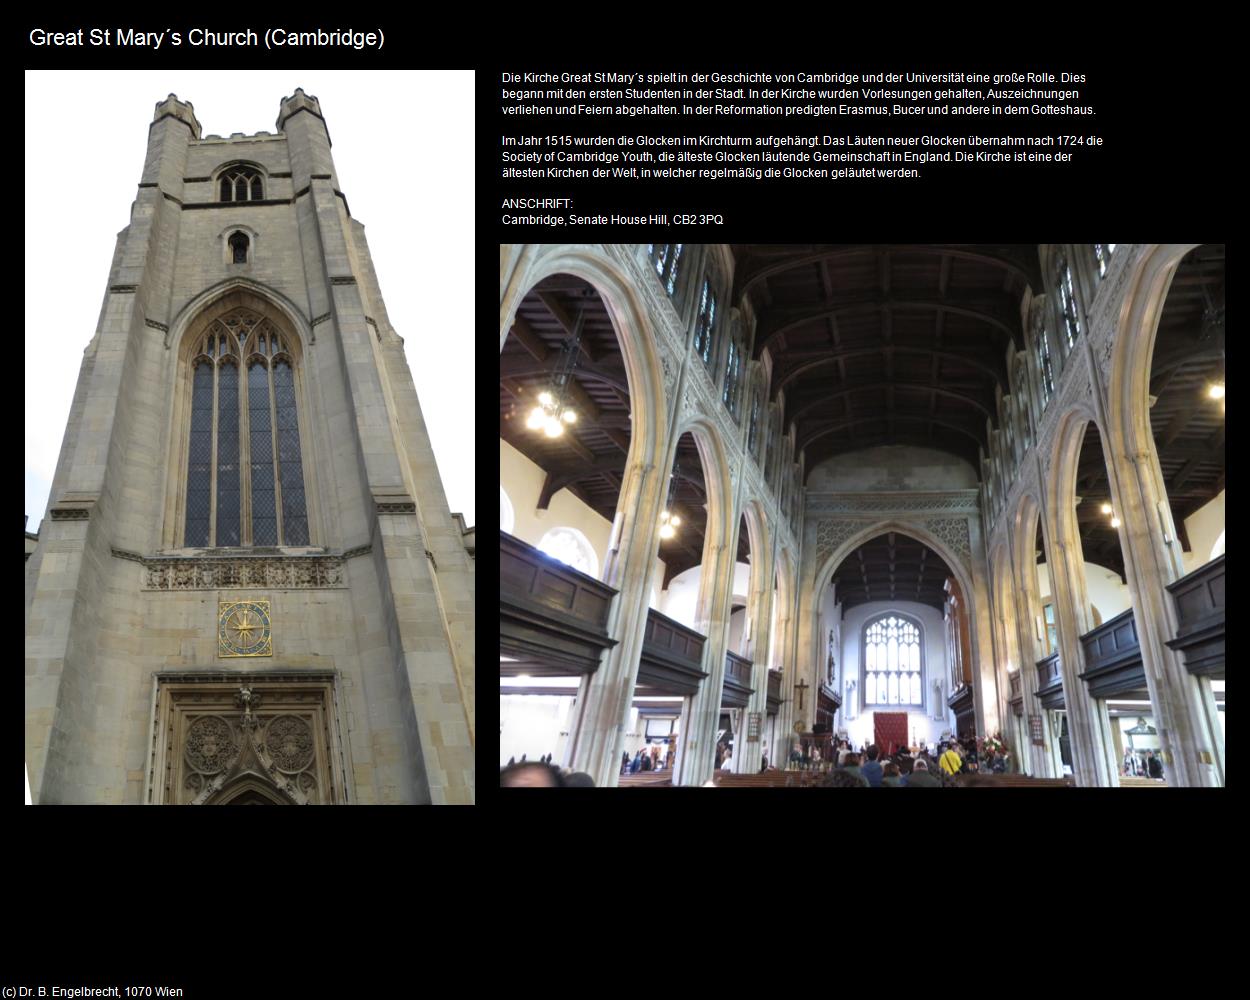 Great St Mary‘s Church (Cambridge, England) in Kulturatlas-ENGLAND und WALES